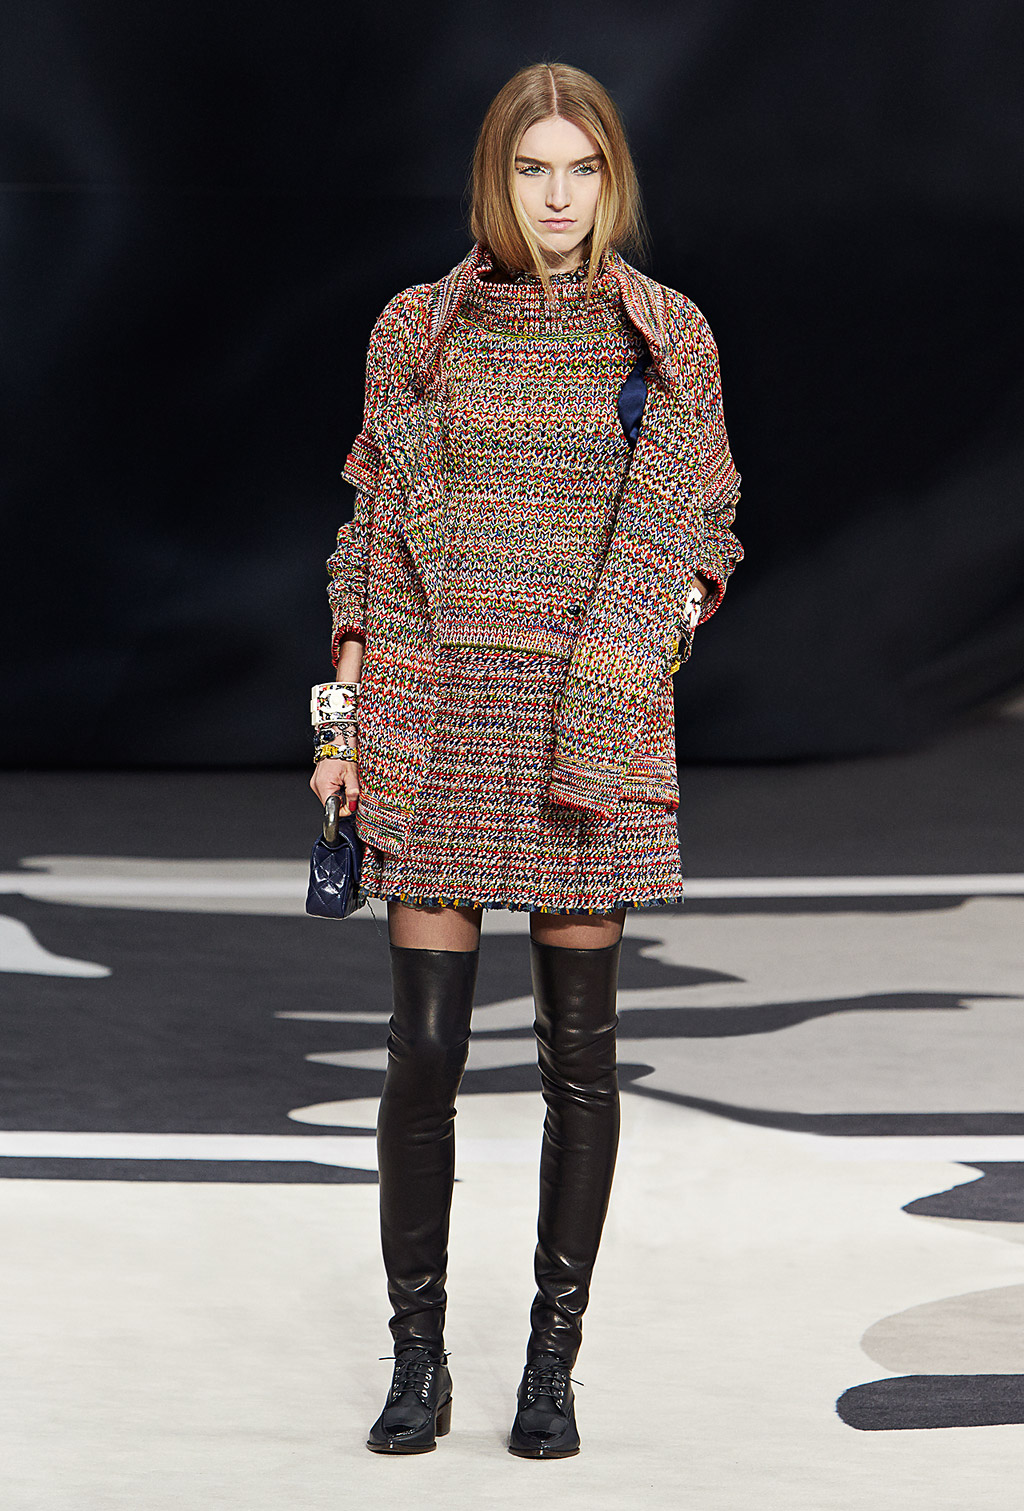 Chanel Fall Winter 2013.14 Womenswear Collection